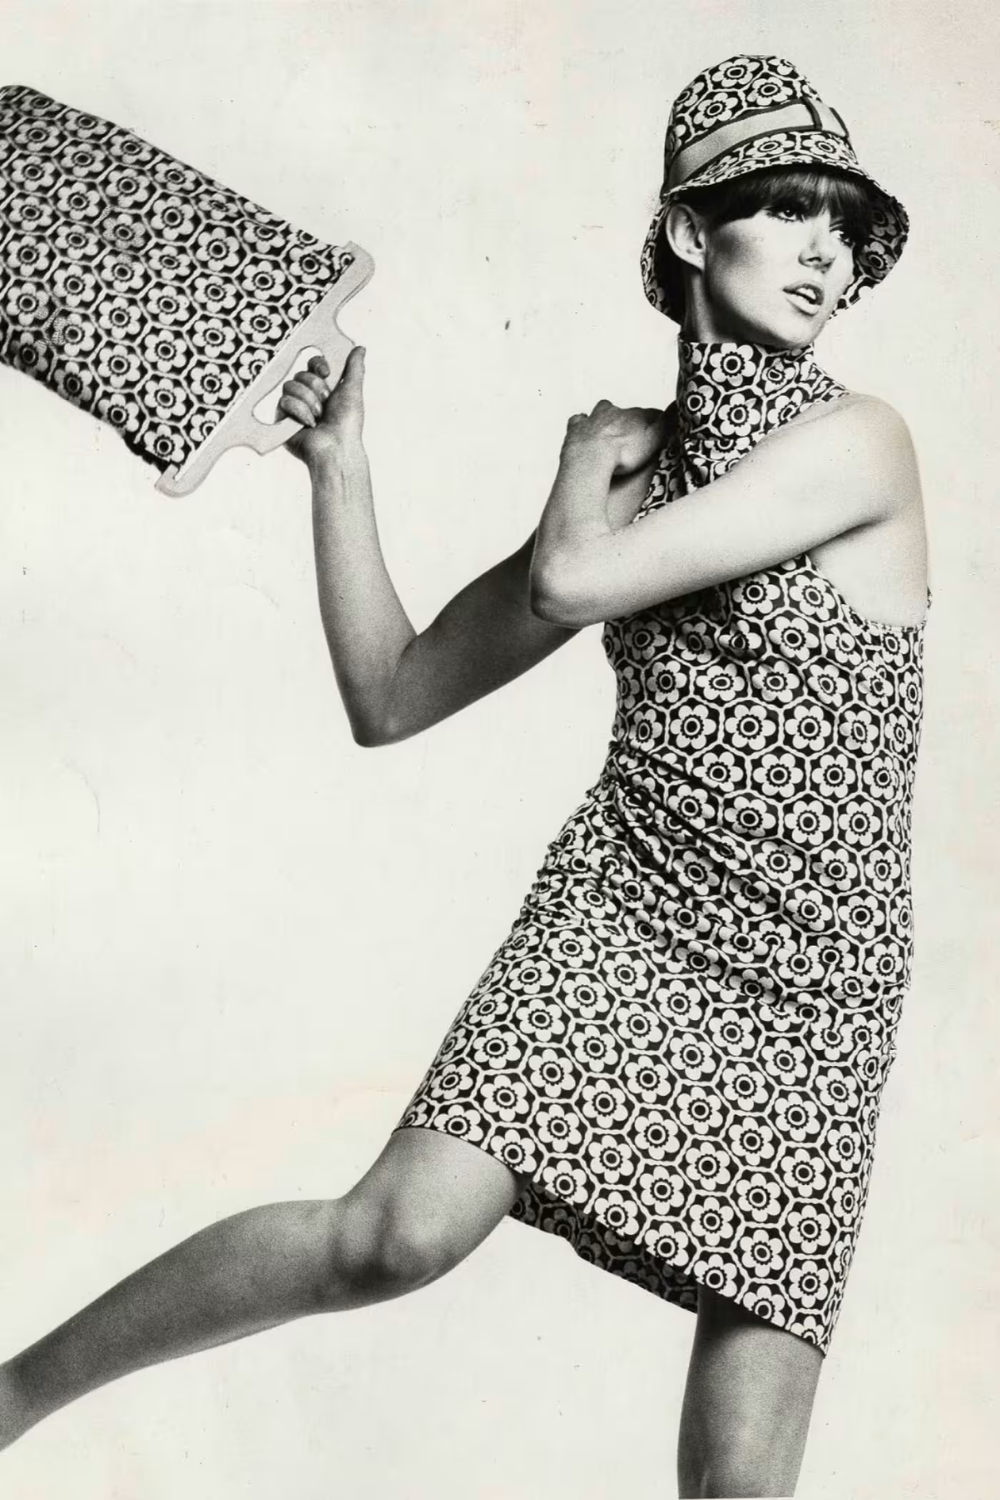 Floral print shift dress and matching tote bag and hat by Biba, 1966